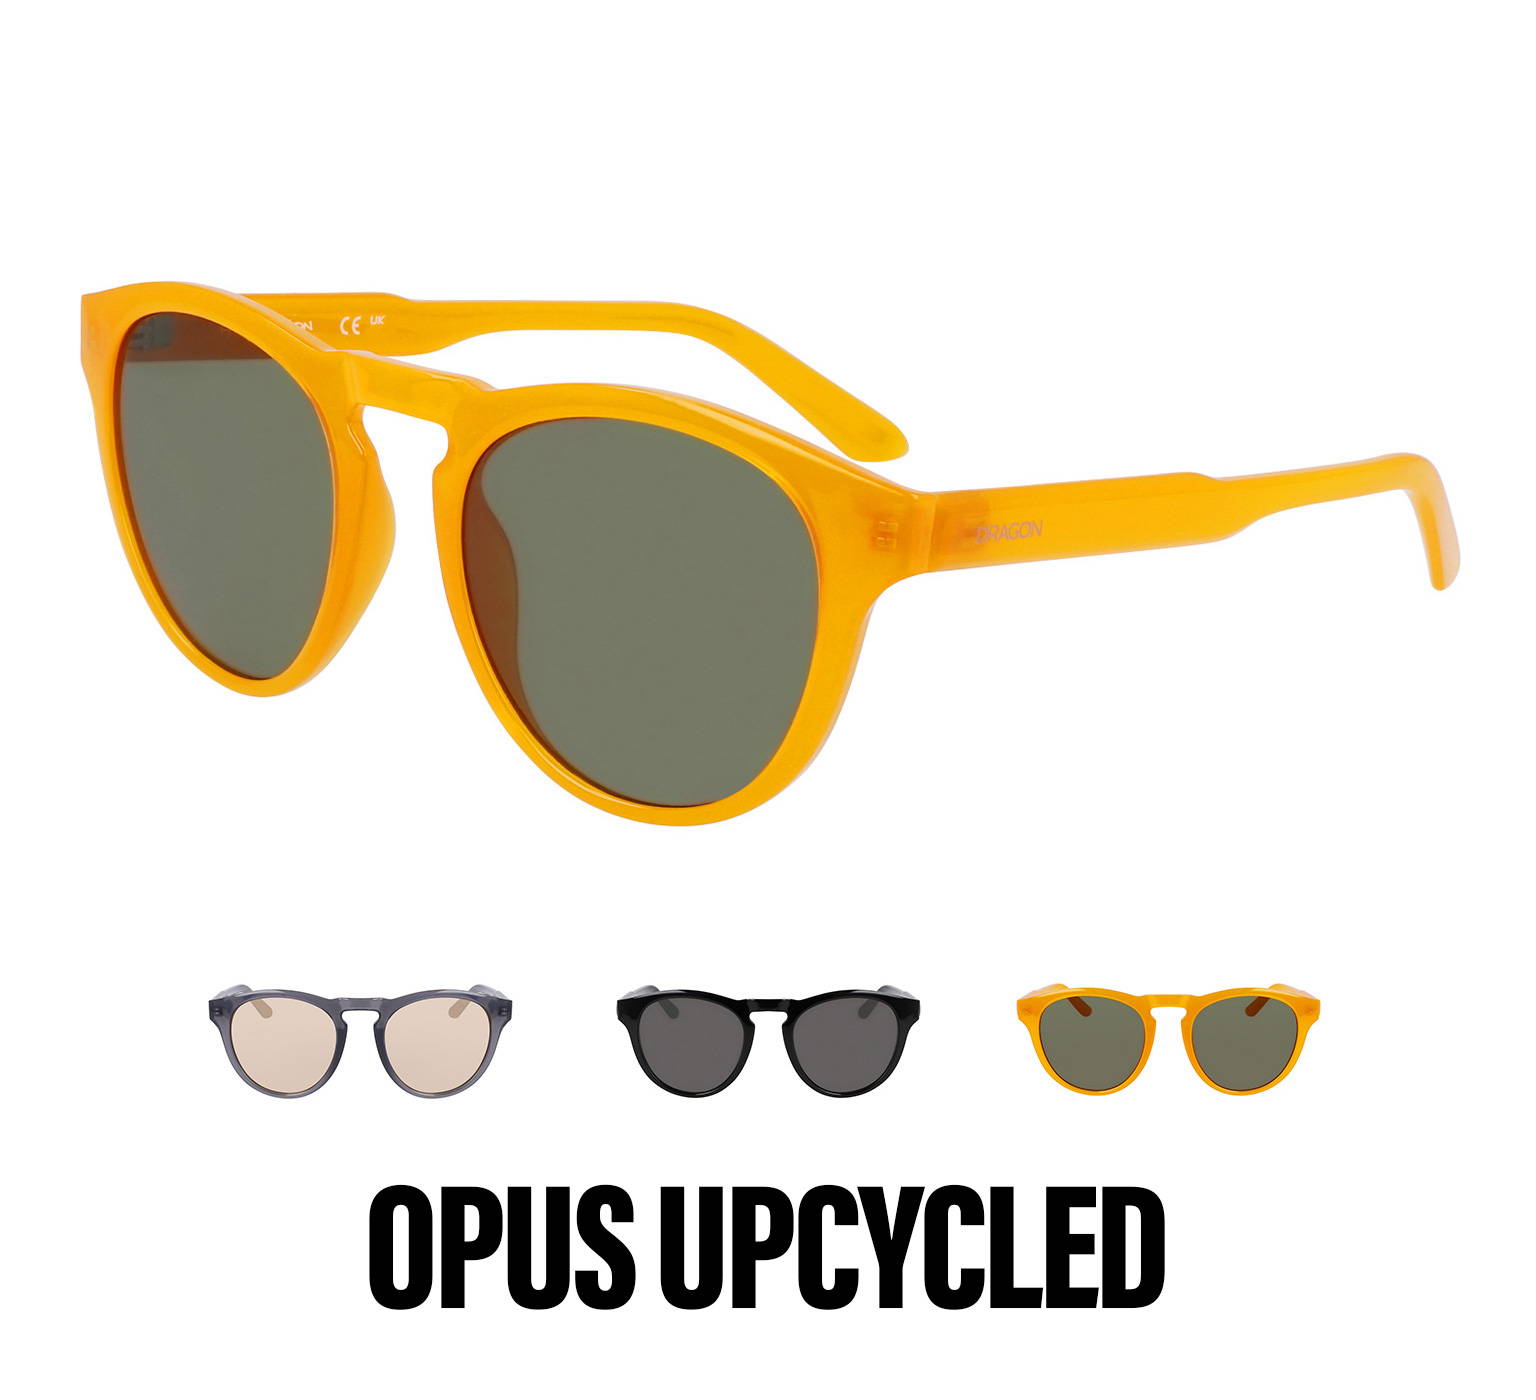 Opus Upcycled